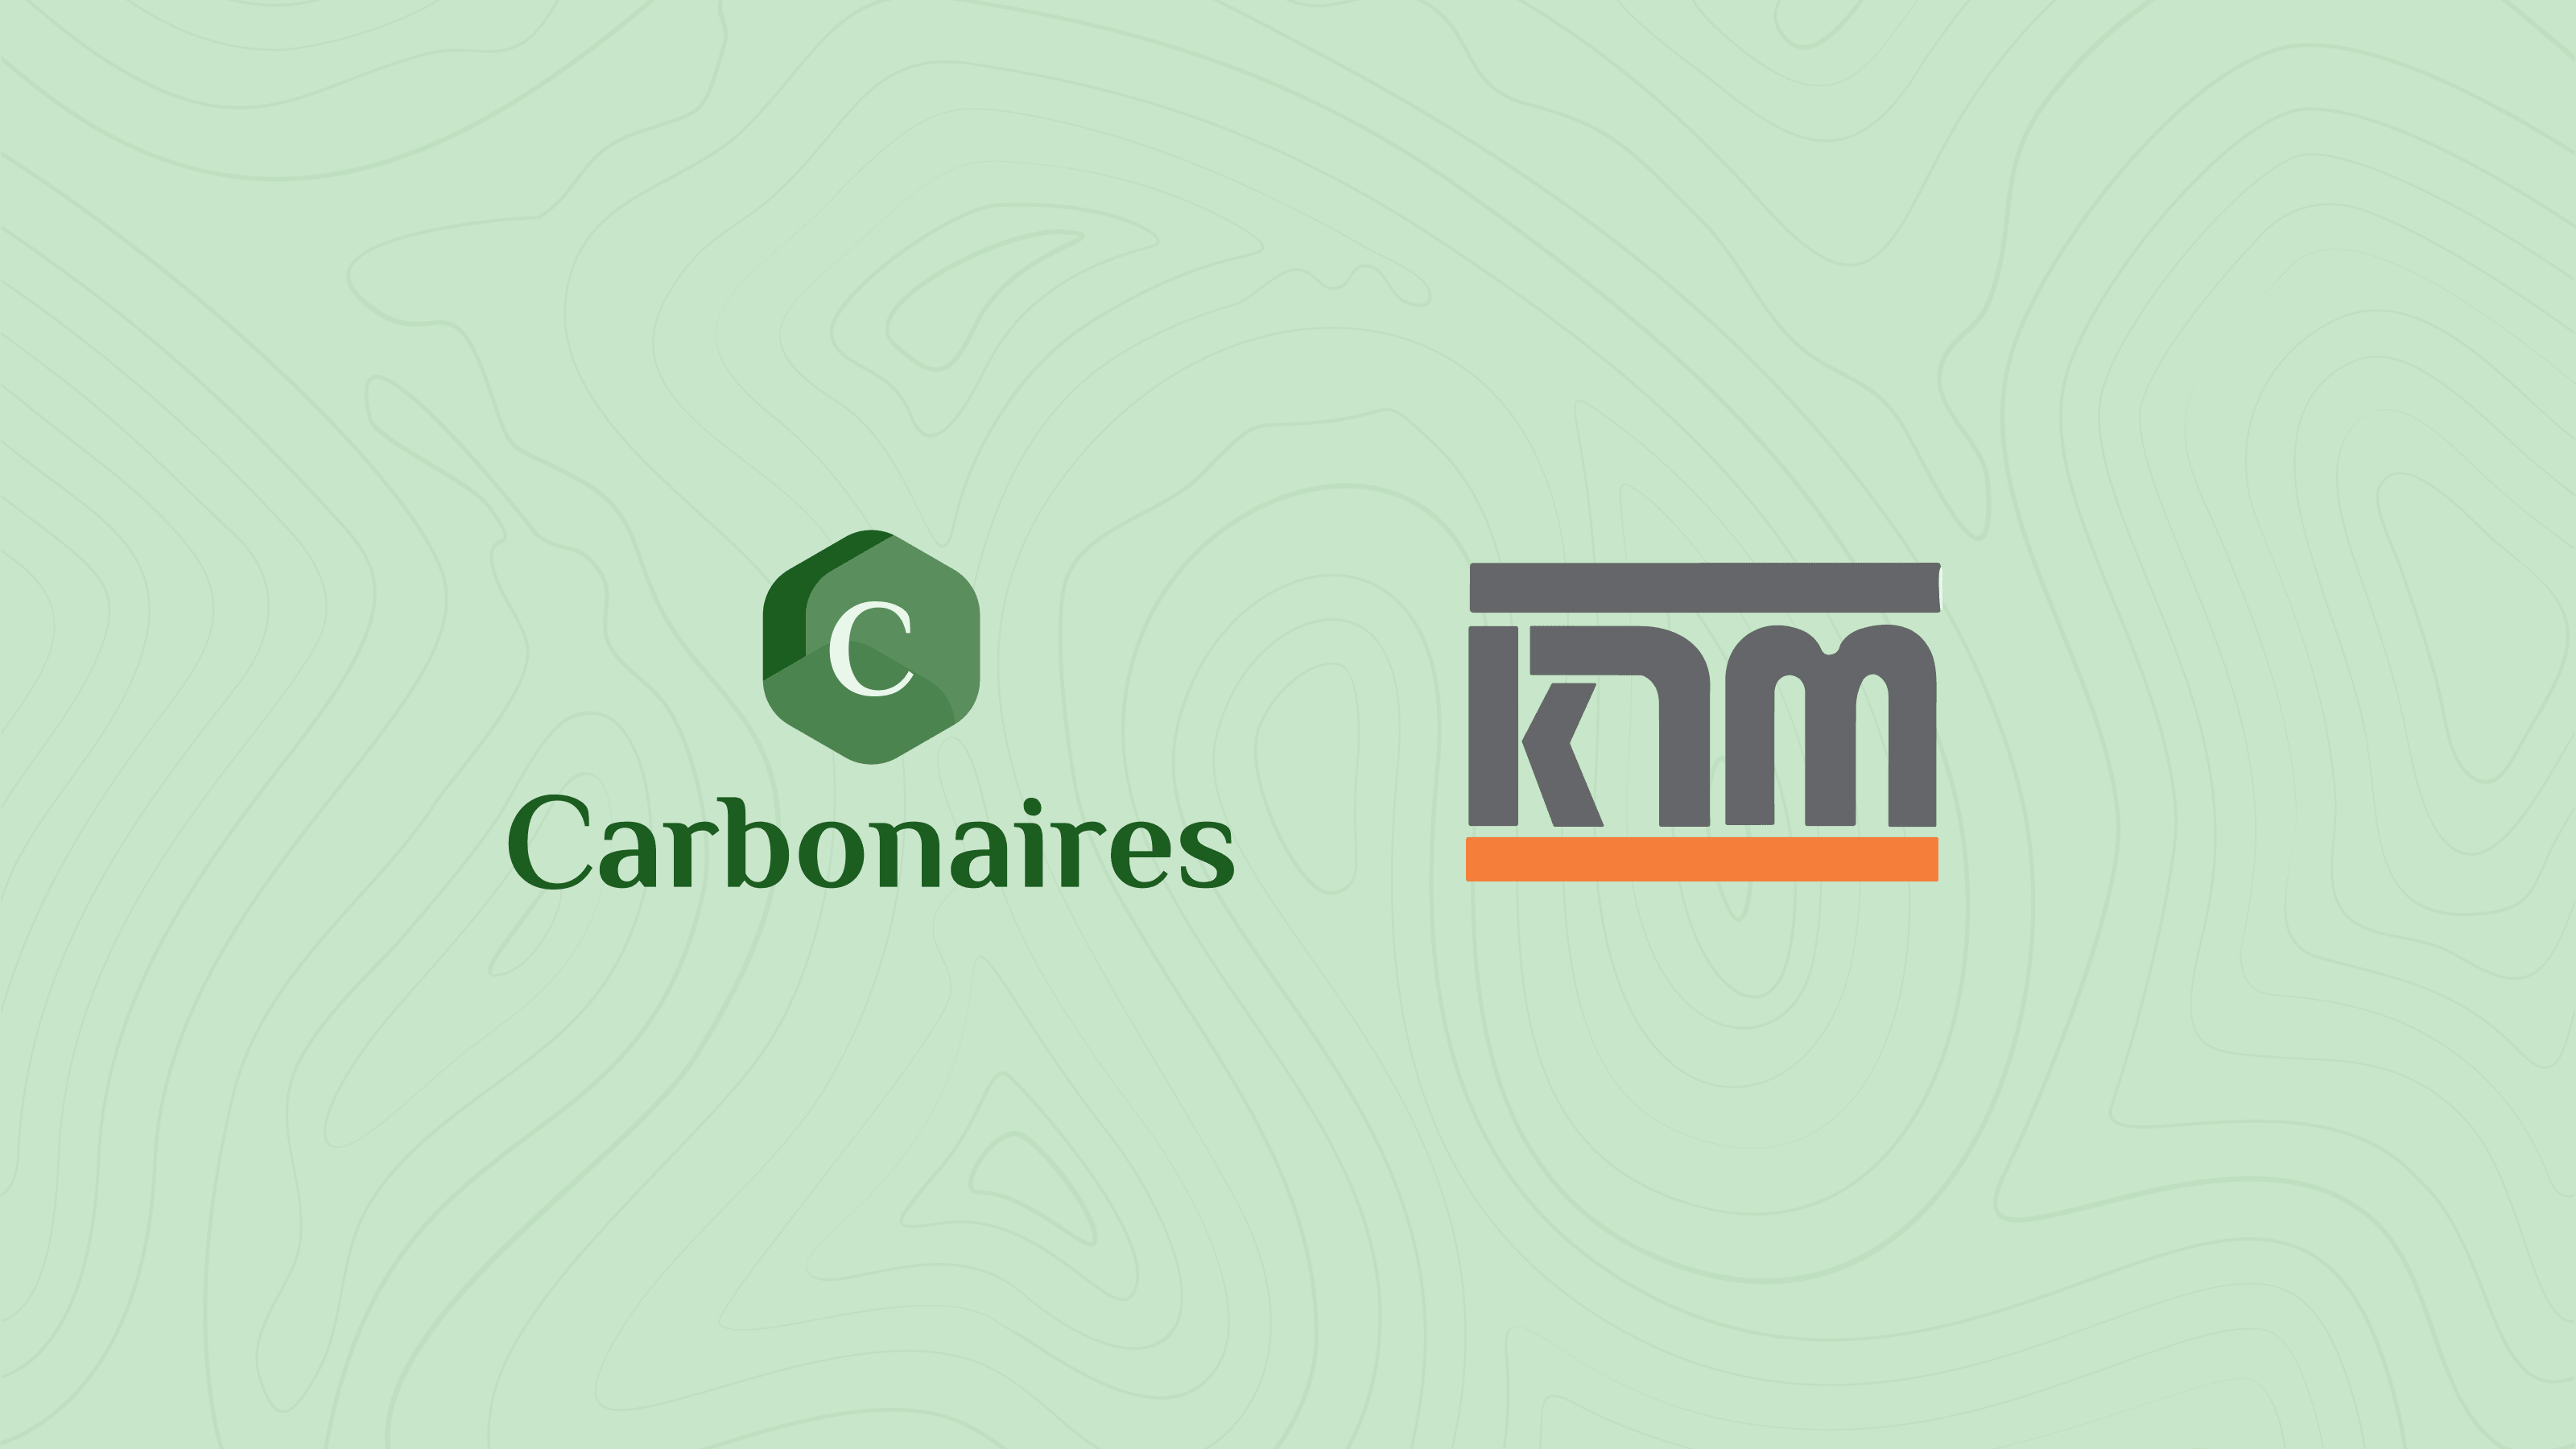 Carbonaires secures strategic investment from KTM to boost carbon & biodiversity projects